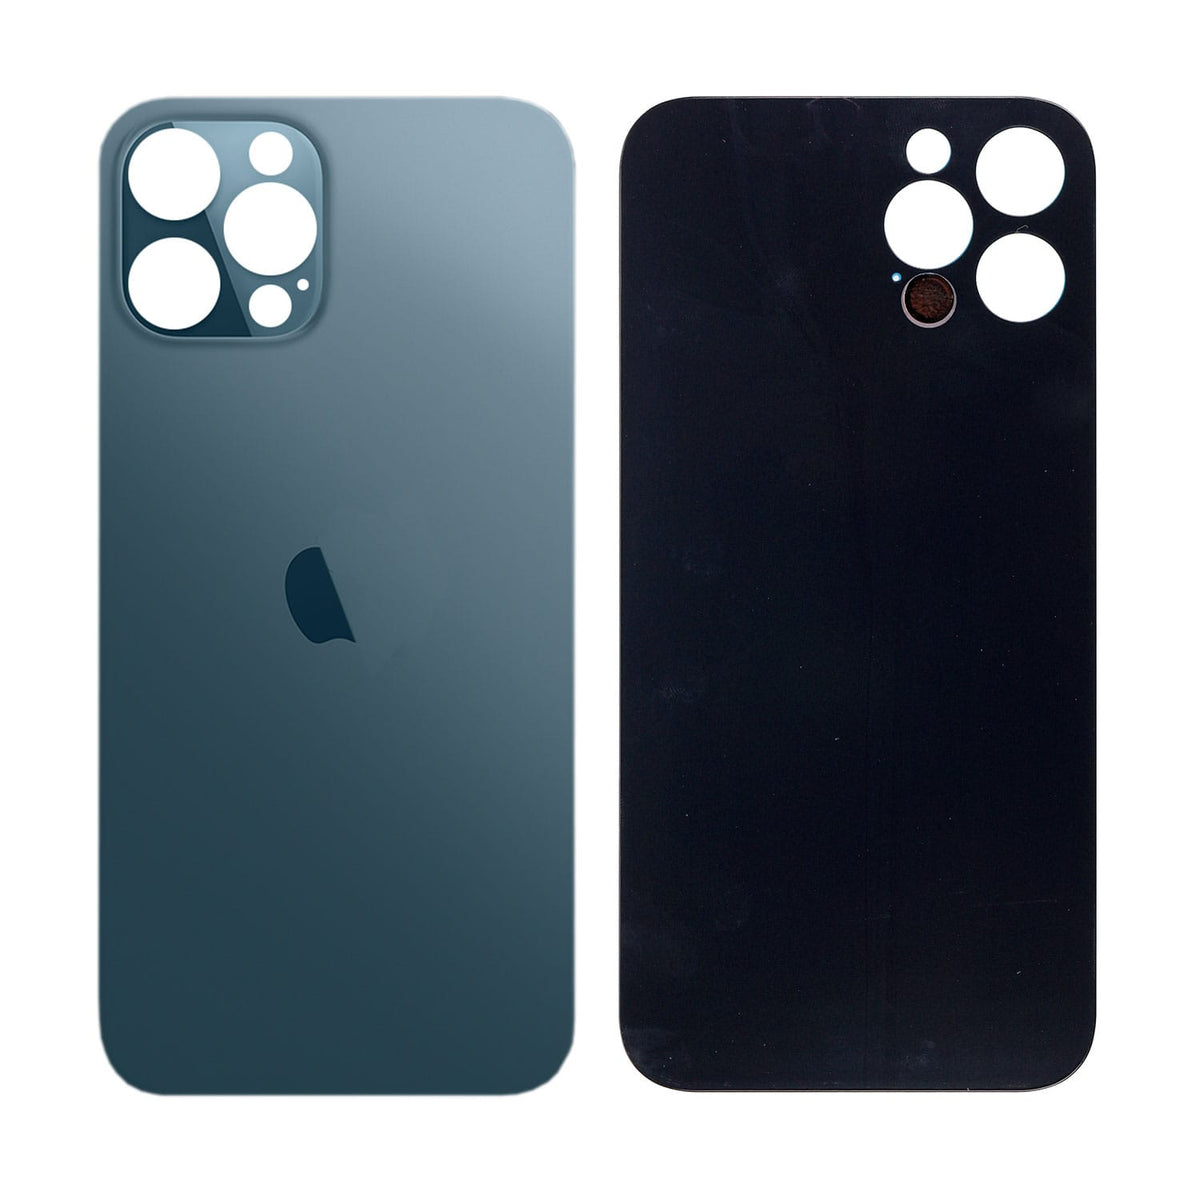 PACIFIC BLUE BACK COVER FOR IPHONE 12 PRO MAX